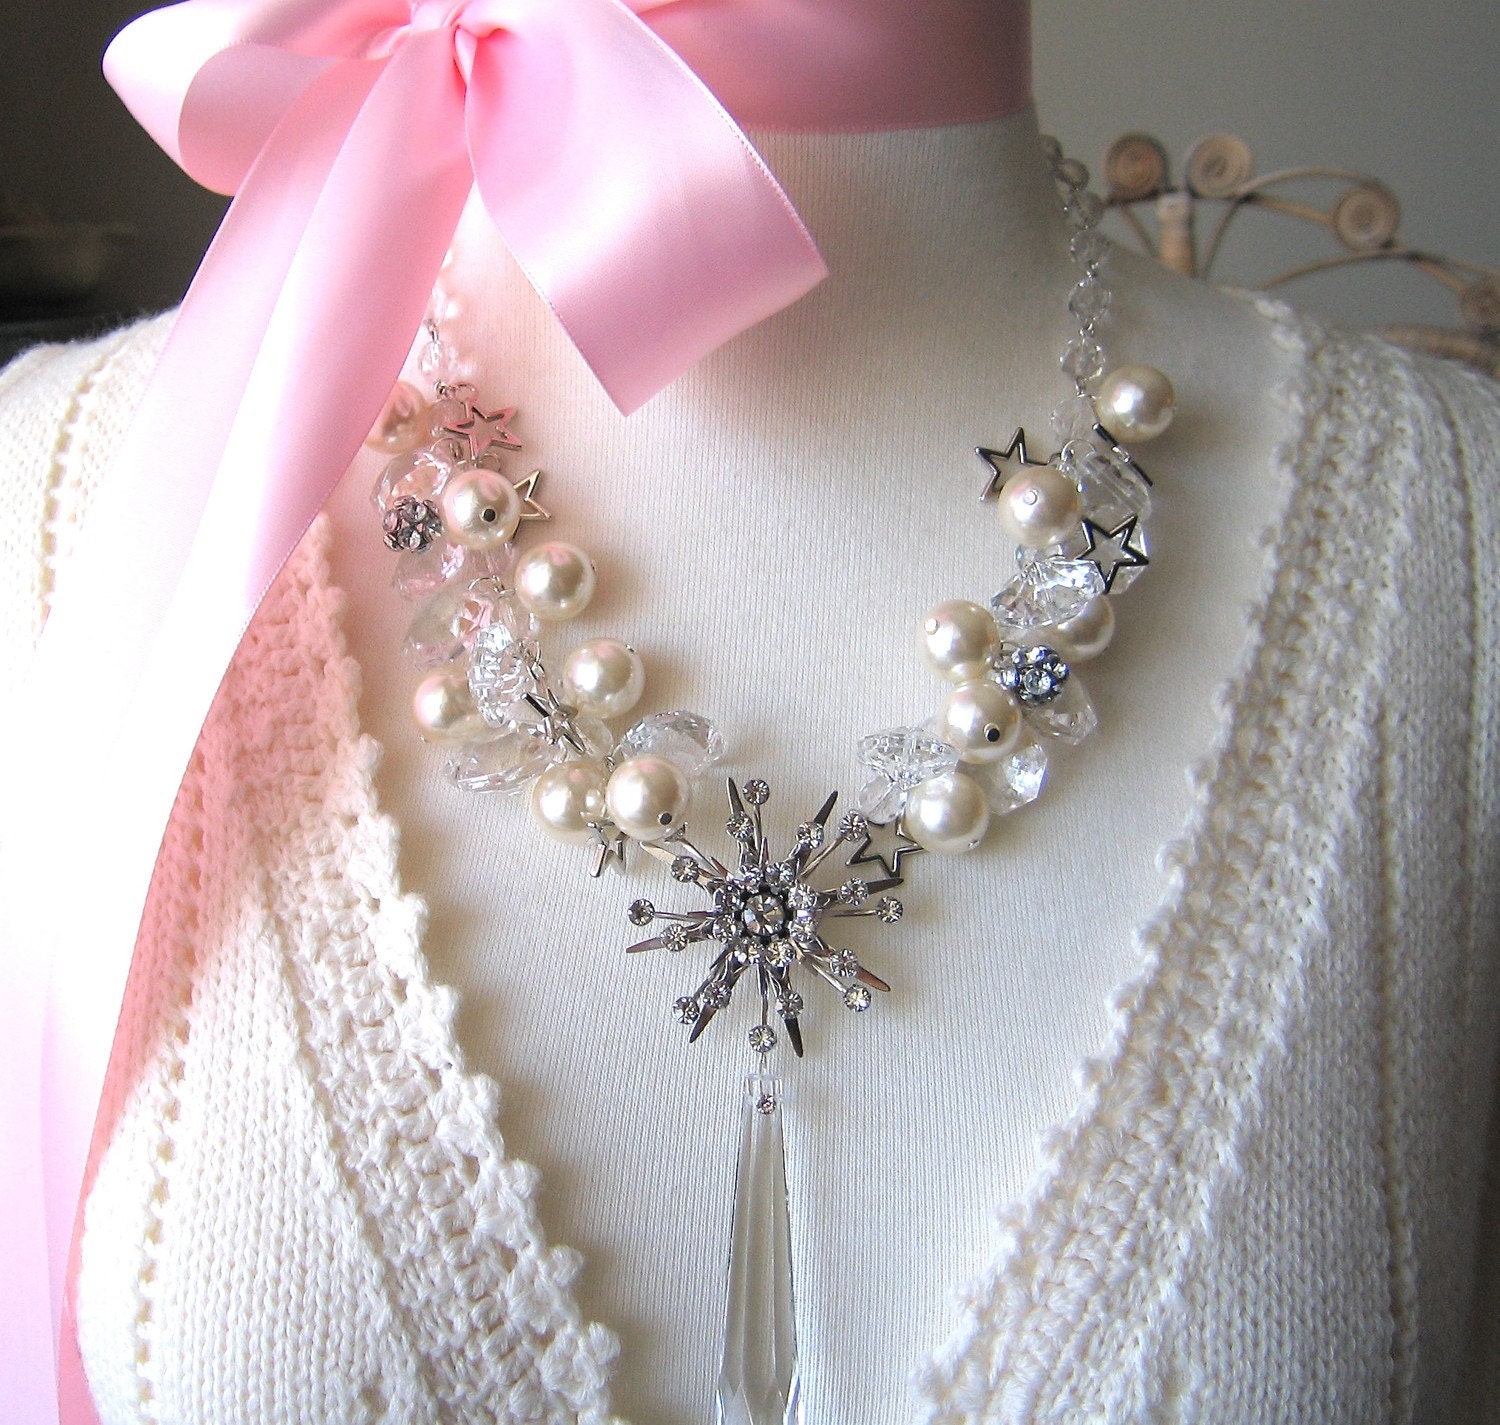 Jack Frost Necklace - A Cool Compilation Of Frosty Vintage Rhinestones And Crystal Ice - Chilly Winter White Pearls And Sparkling Snowflakes - BRRRRR -Baby It's Cold Outside -A Fantasy Statement Piece To Melt Her Heart